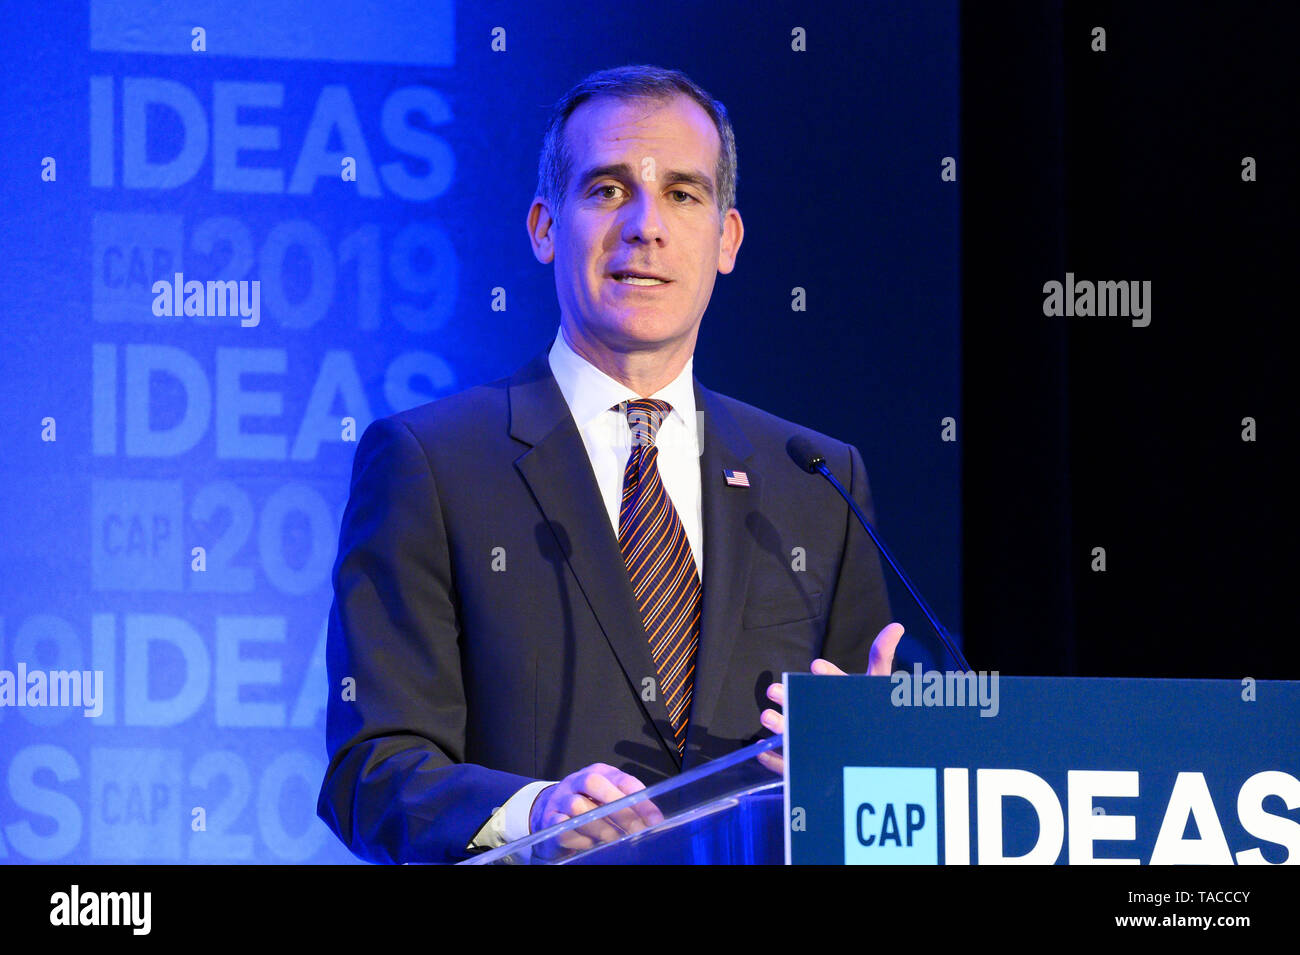 Washington, DC, USA. 22nd May, 2019. Los Angeles, California Mayor ERIC GARCETTI (D) speaking at The Center for American Progress CAP 2019 Ideas Conference in Washington, DC on May 22, 2019. Credit: Michael Brochstein/ZUMA Wire/Alamy Live News Stock Photo